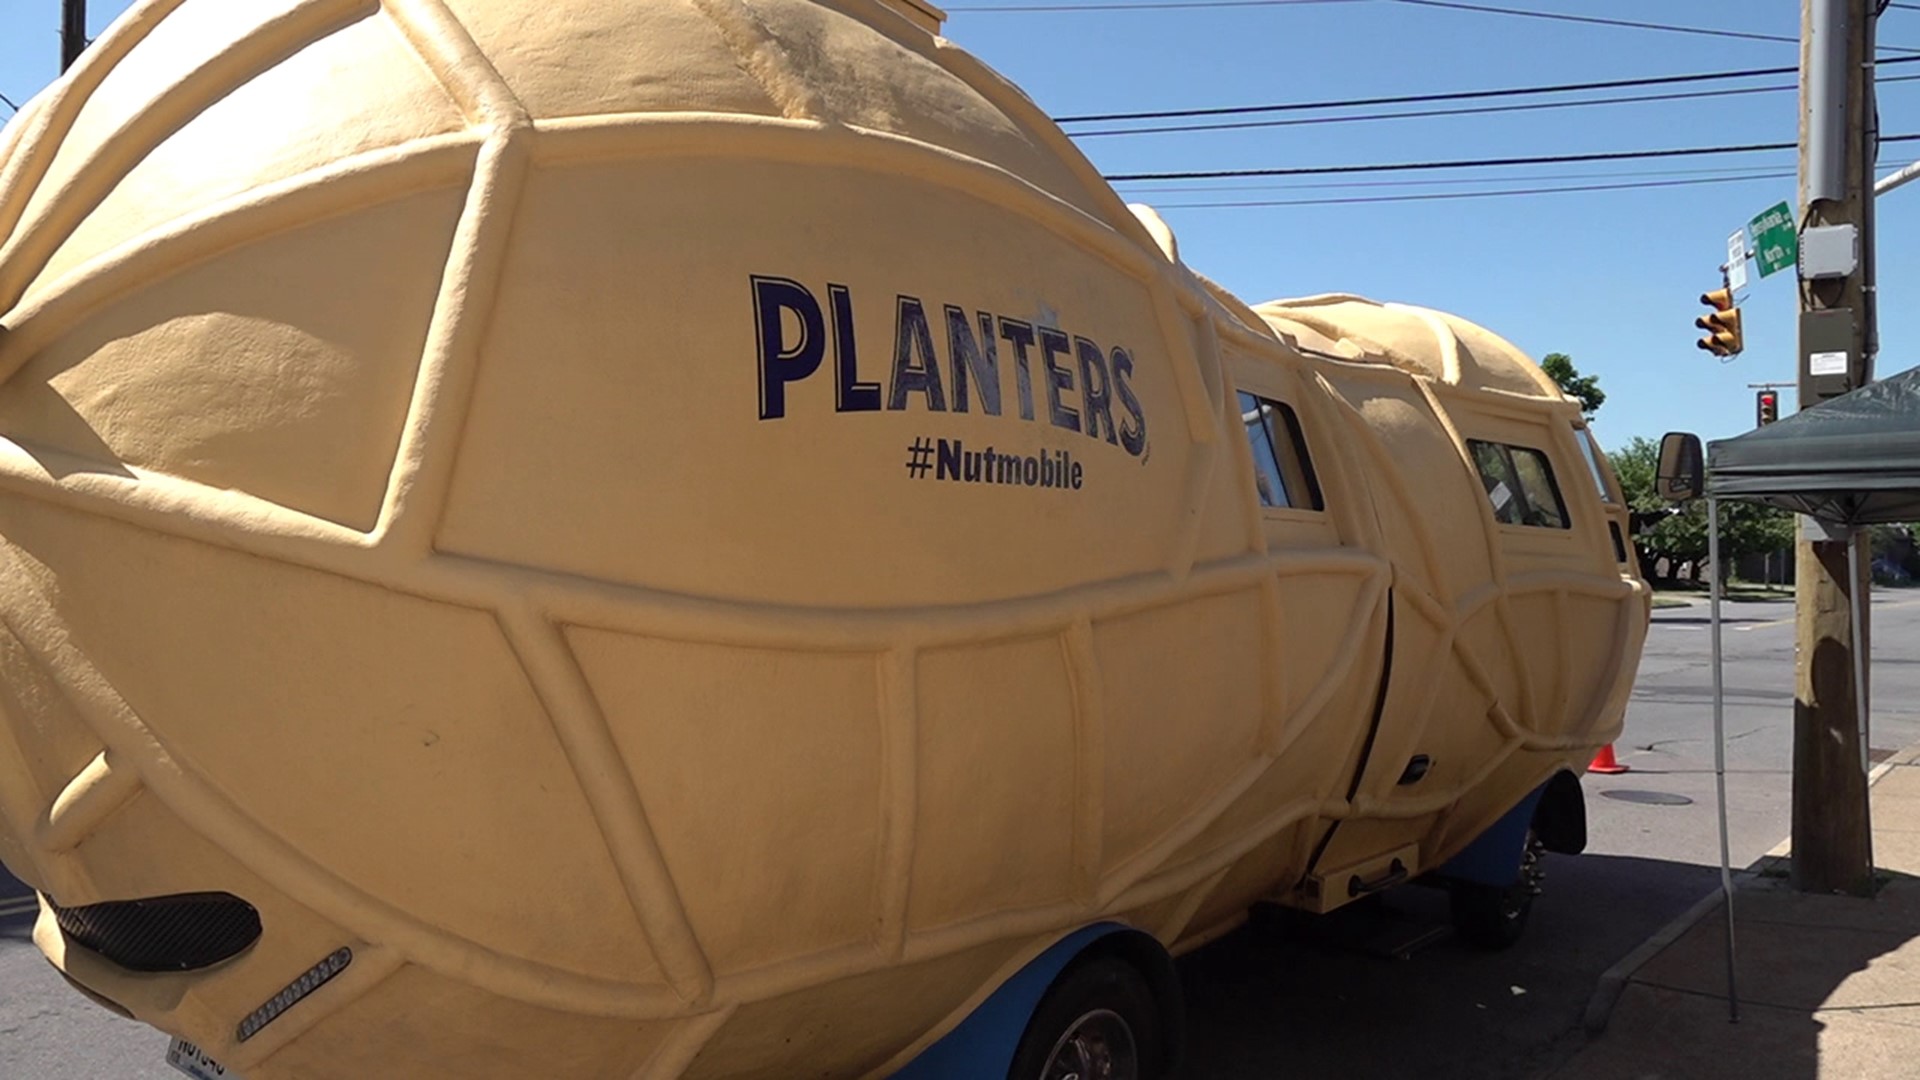 The nut-shaped vehicle traveled to the Diamond City for a sign dedication at one of Wilkes-Barre businessman Thom Greco's properties.